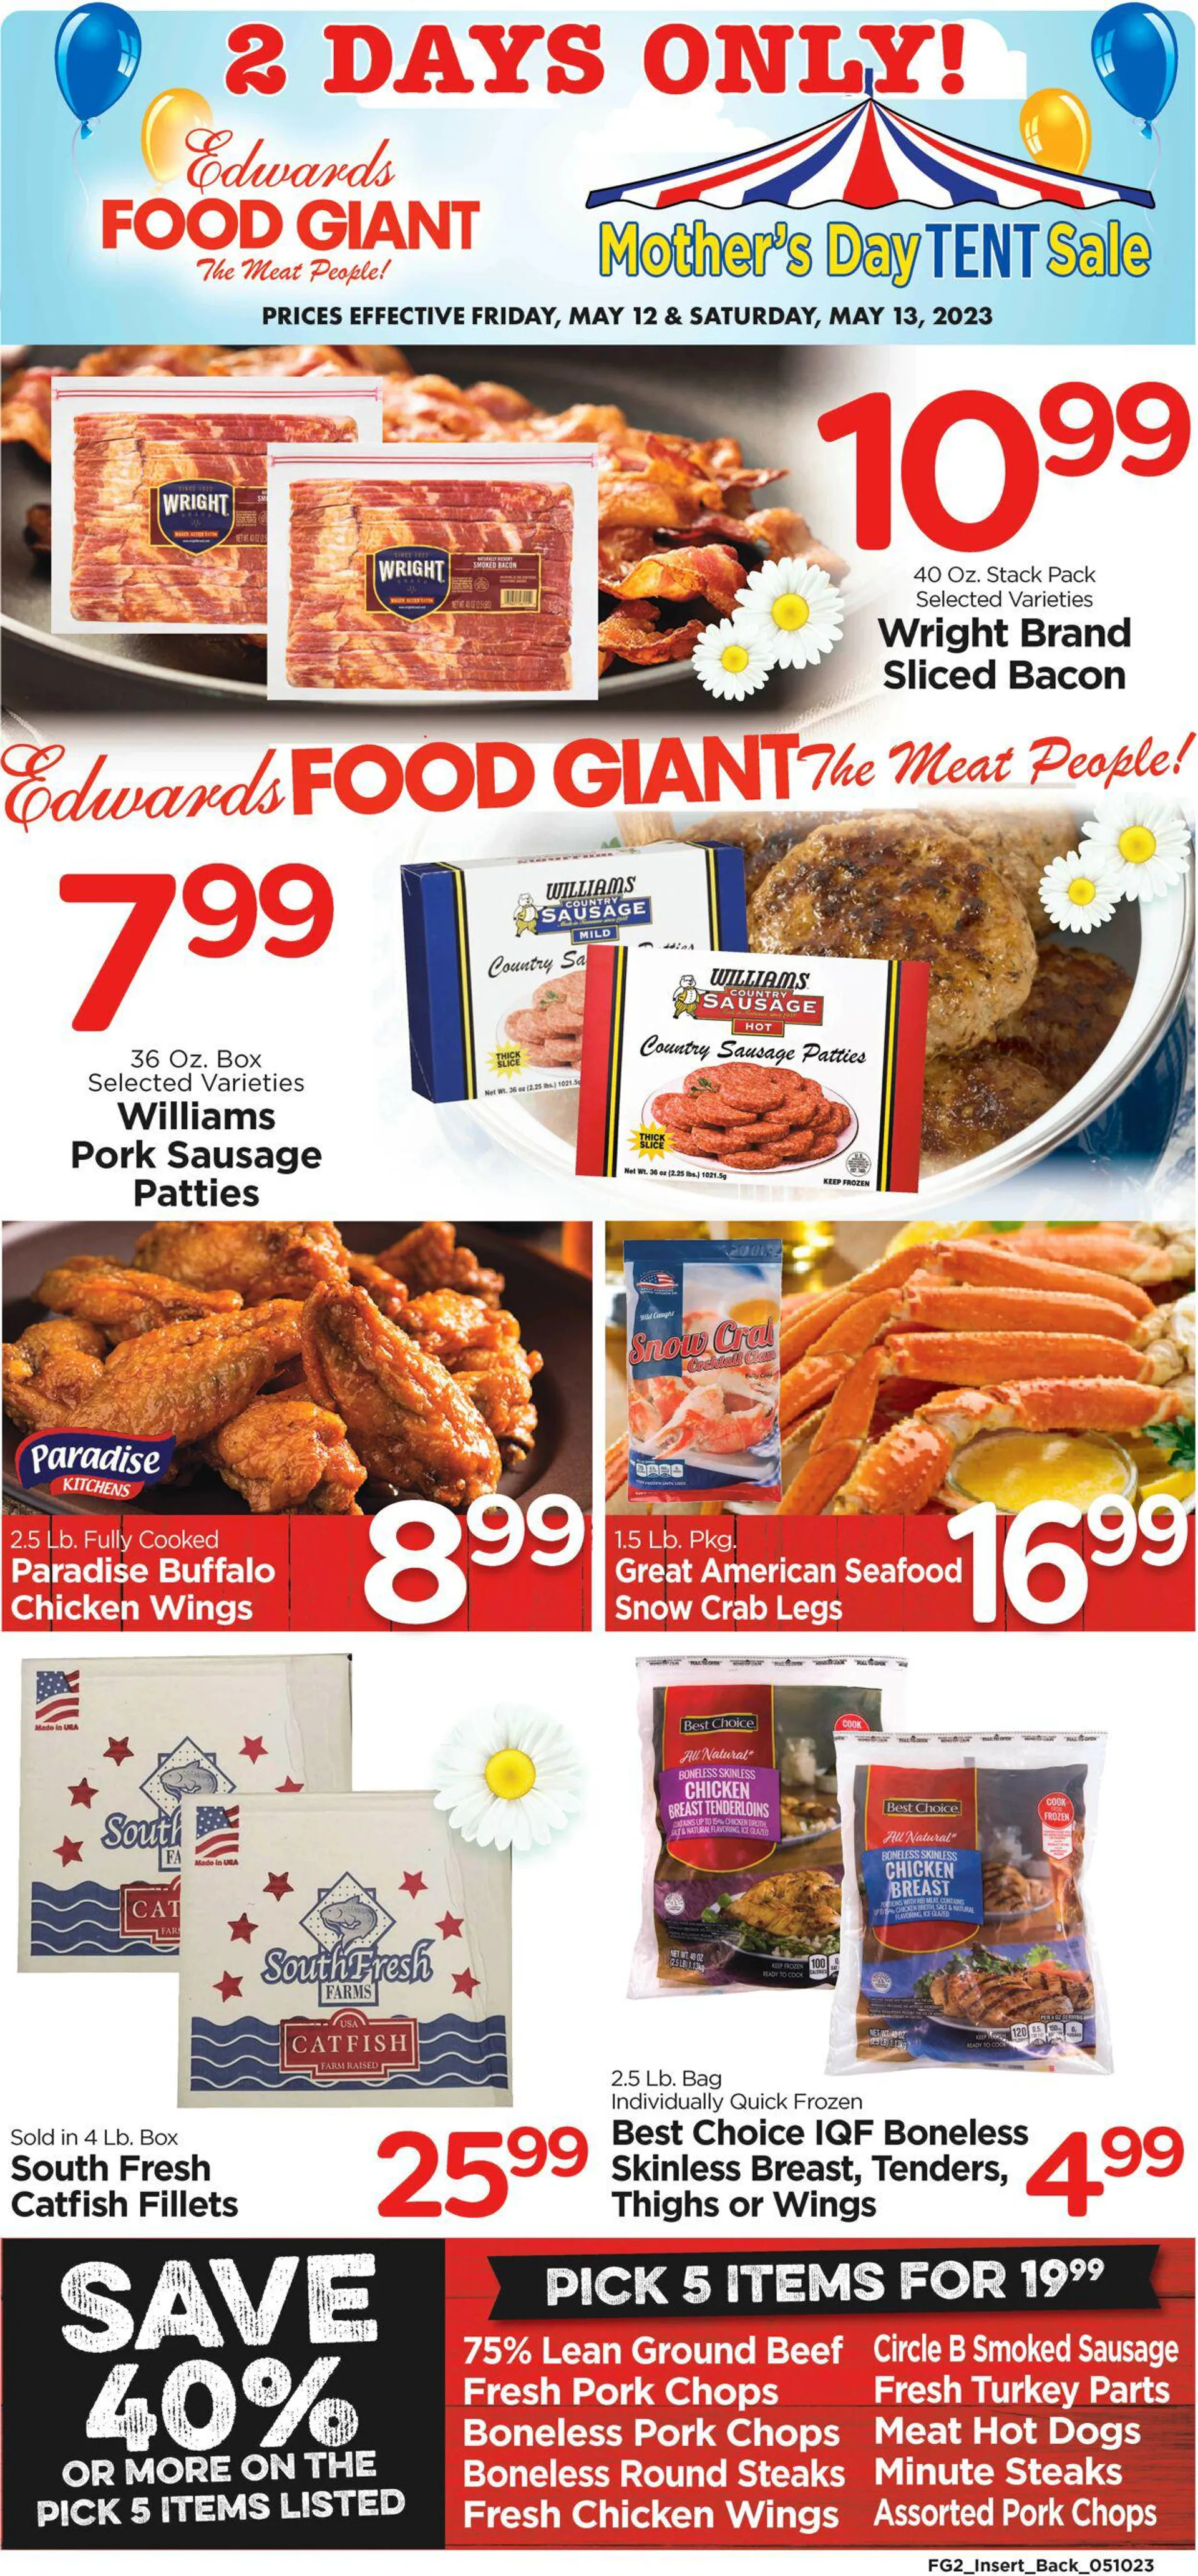 Edwards Food Giant Current weekly ad - 6